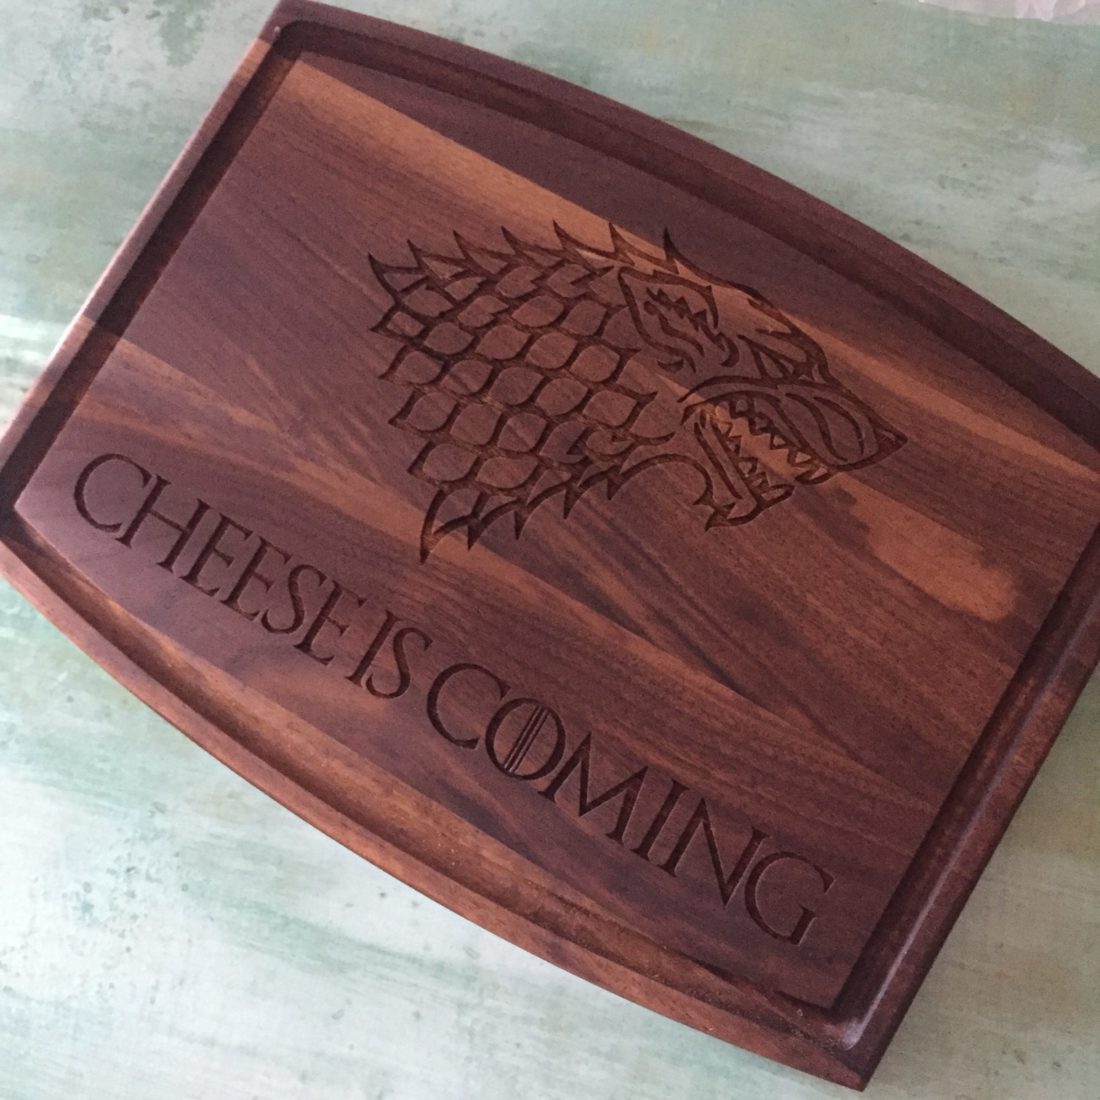 'Cheese is coming' cutting board